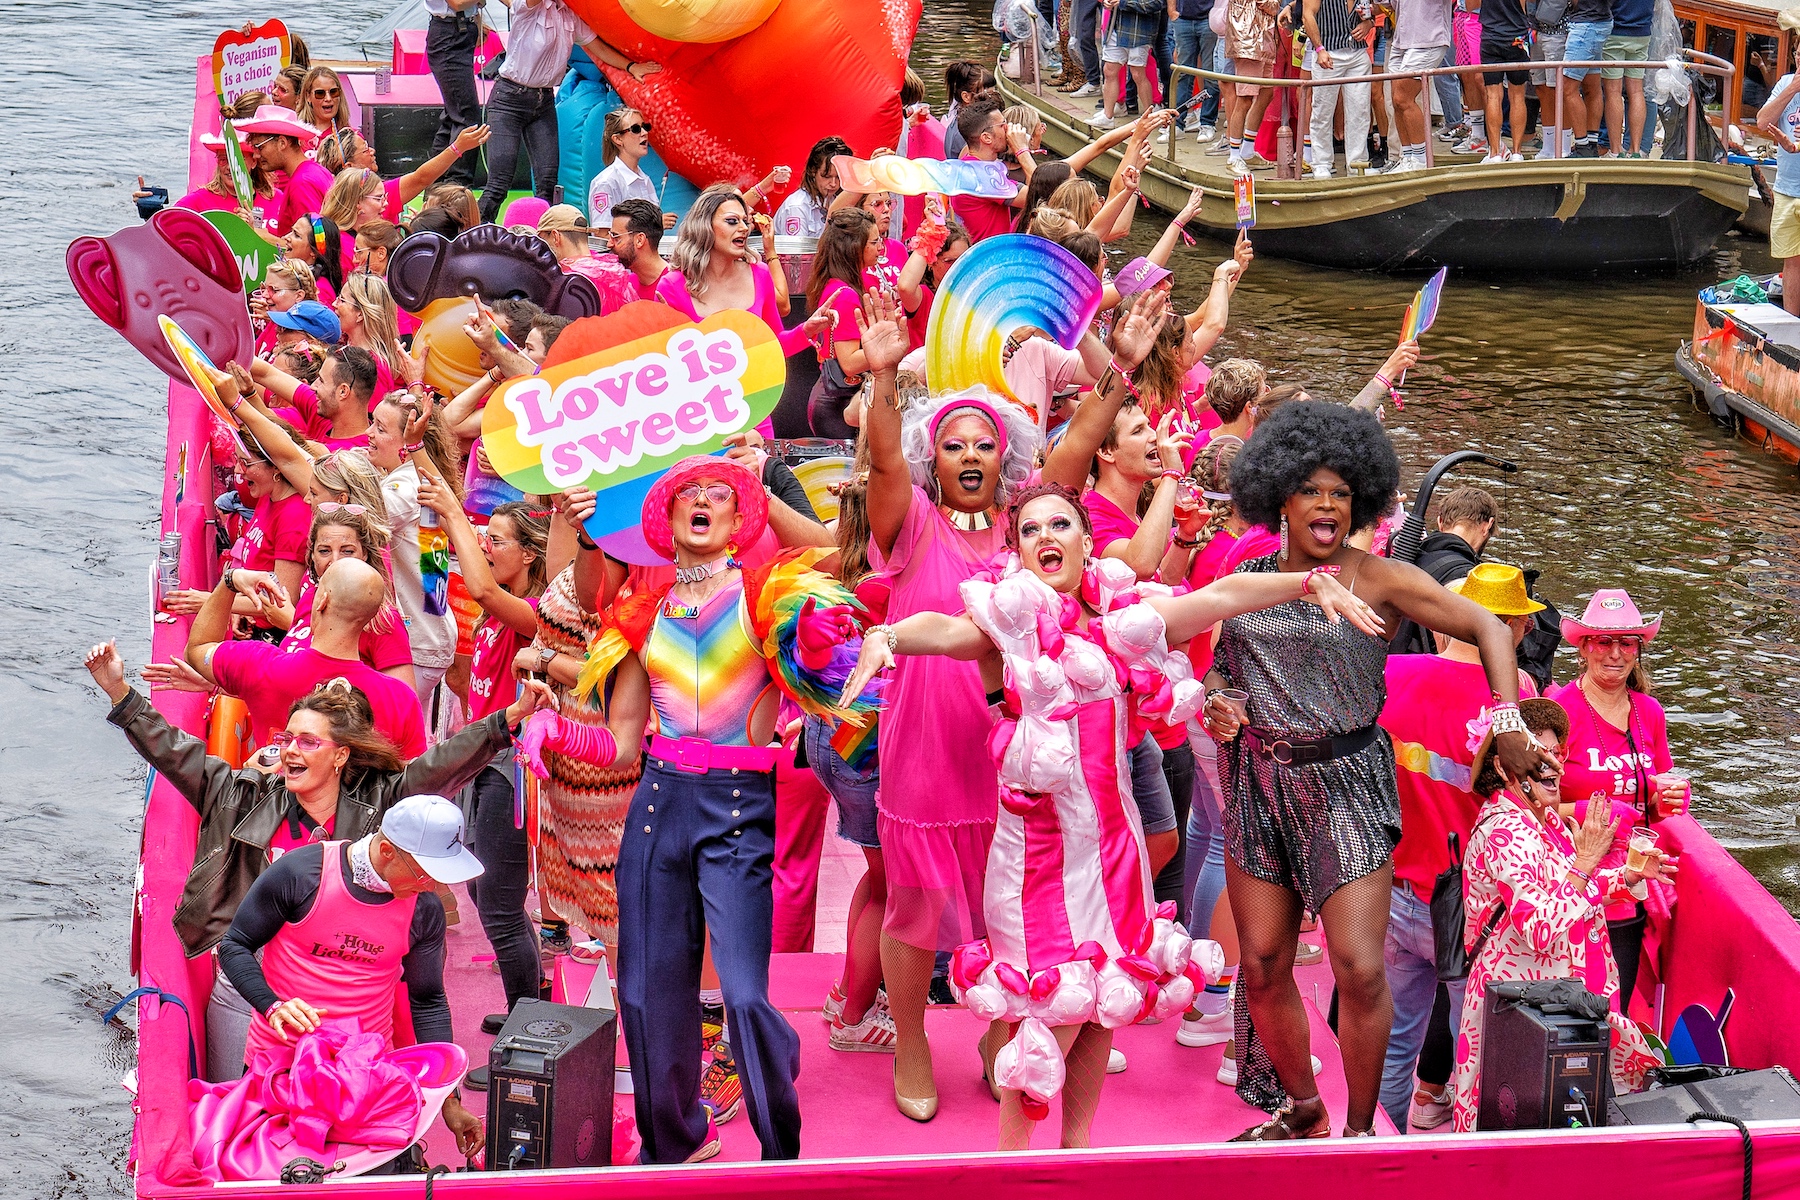 People in colorful outfits are on a boat on Amsterdam's canals celebrating Pride.